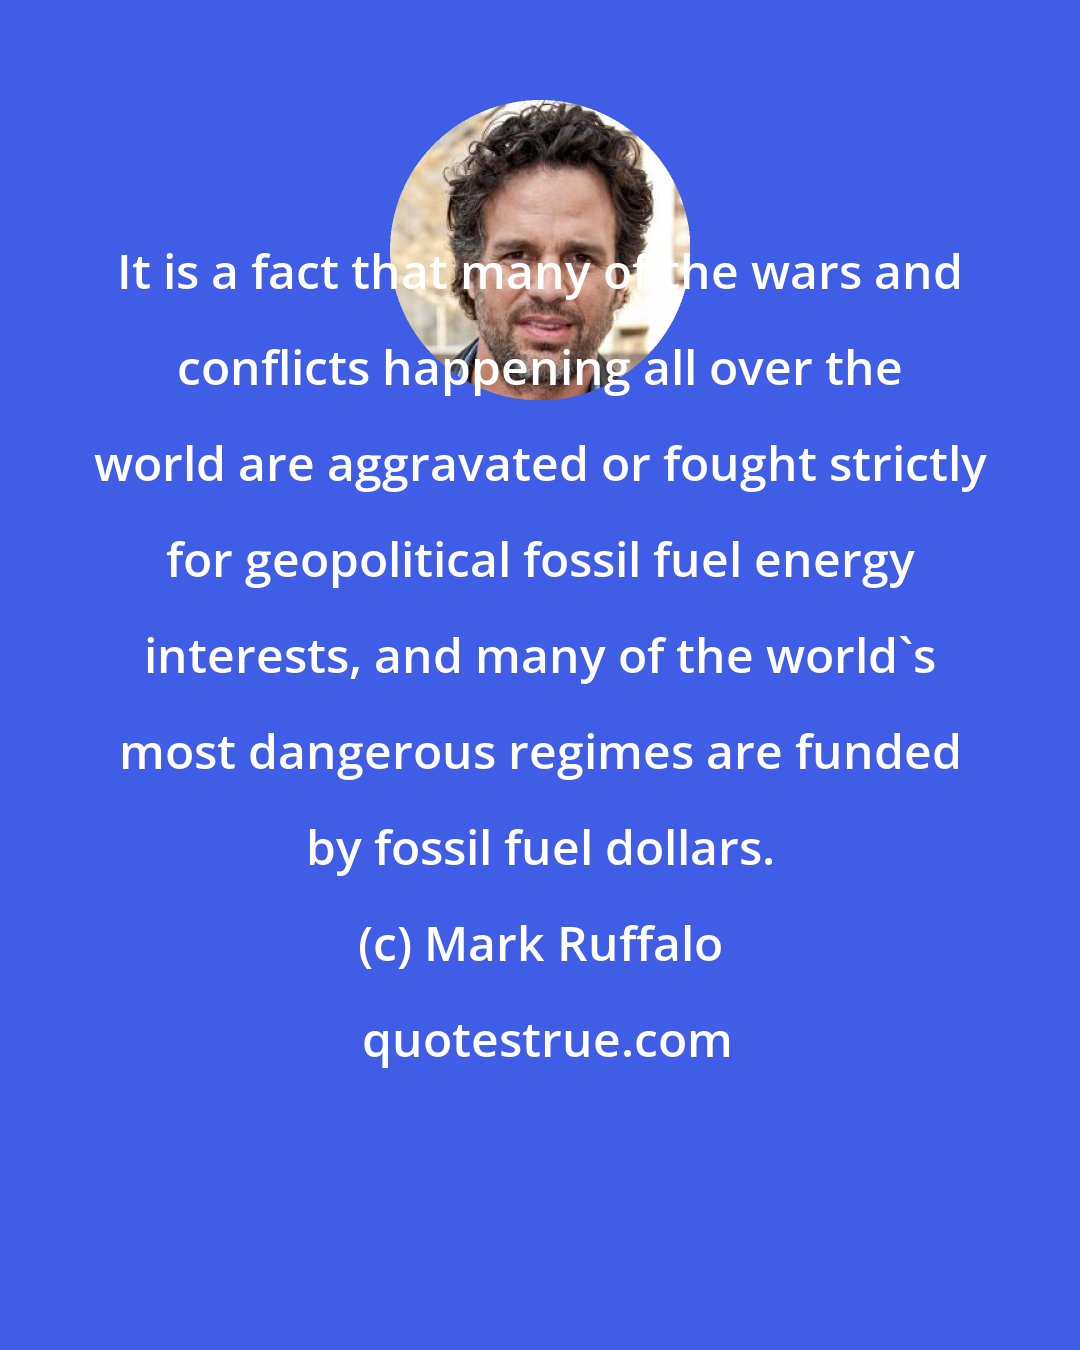 Mark Ruffalo: It is a fact that many of the wars and conflicts happening all over the world are aggravated or fought strictly for geopolitical fossil fuel energy interests, and many of the world's most dangerous regimes are funded by fossil fuel dollars.